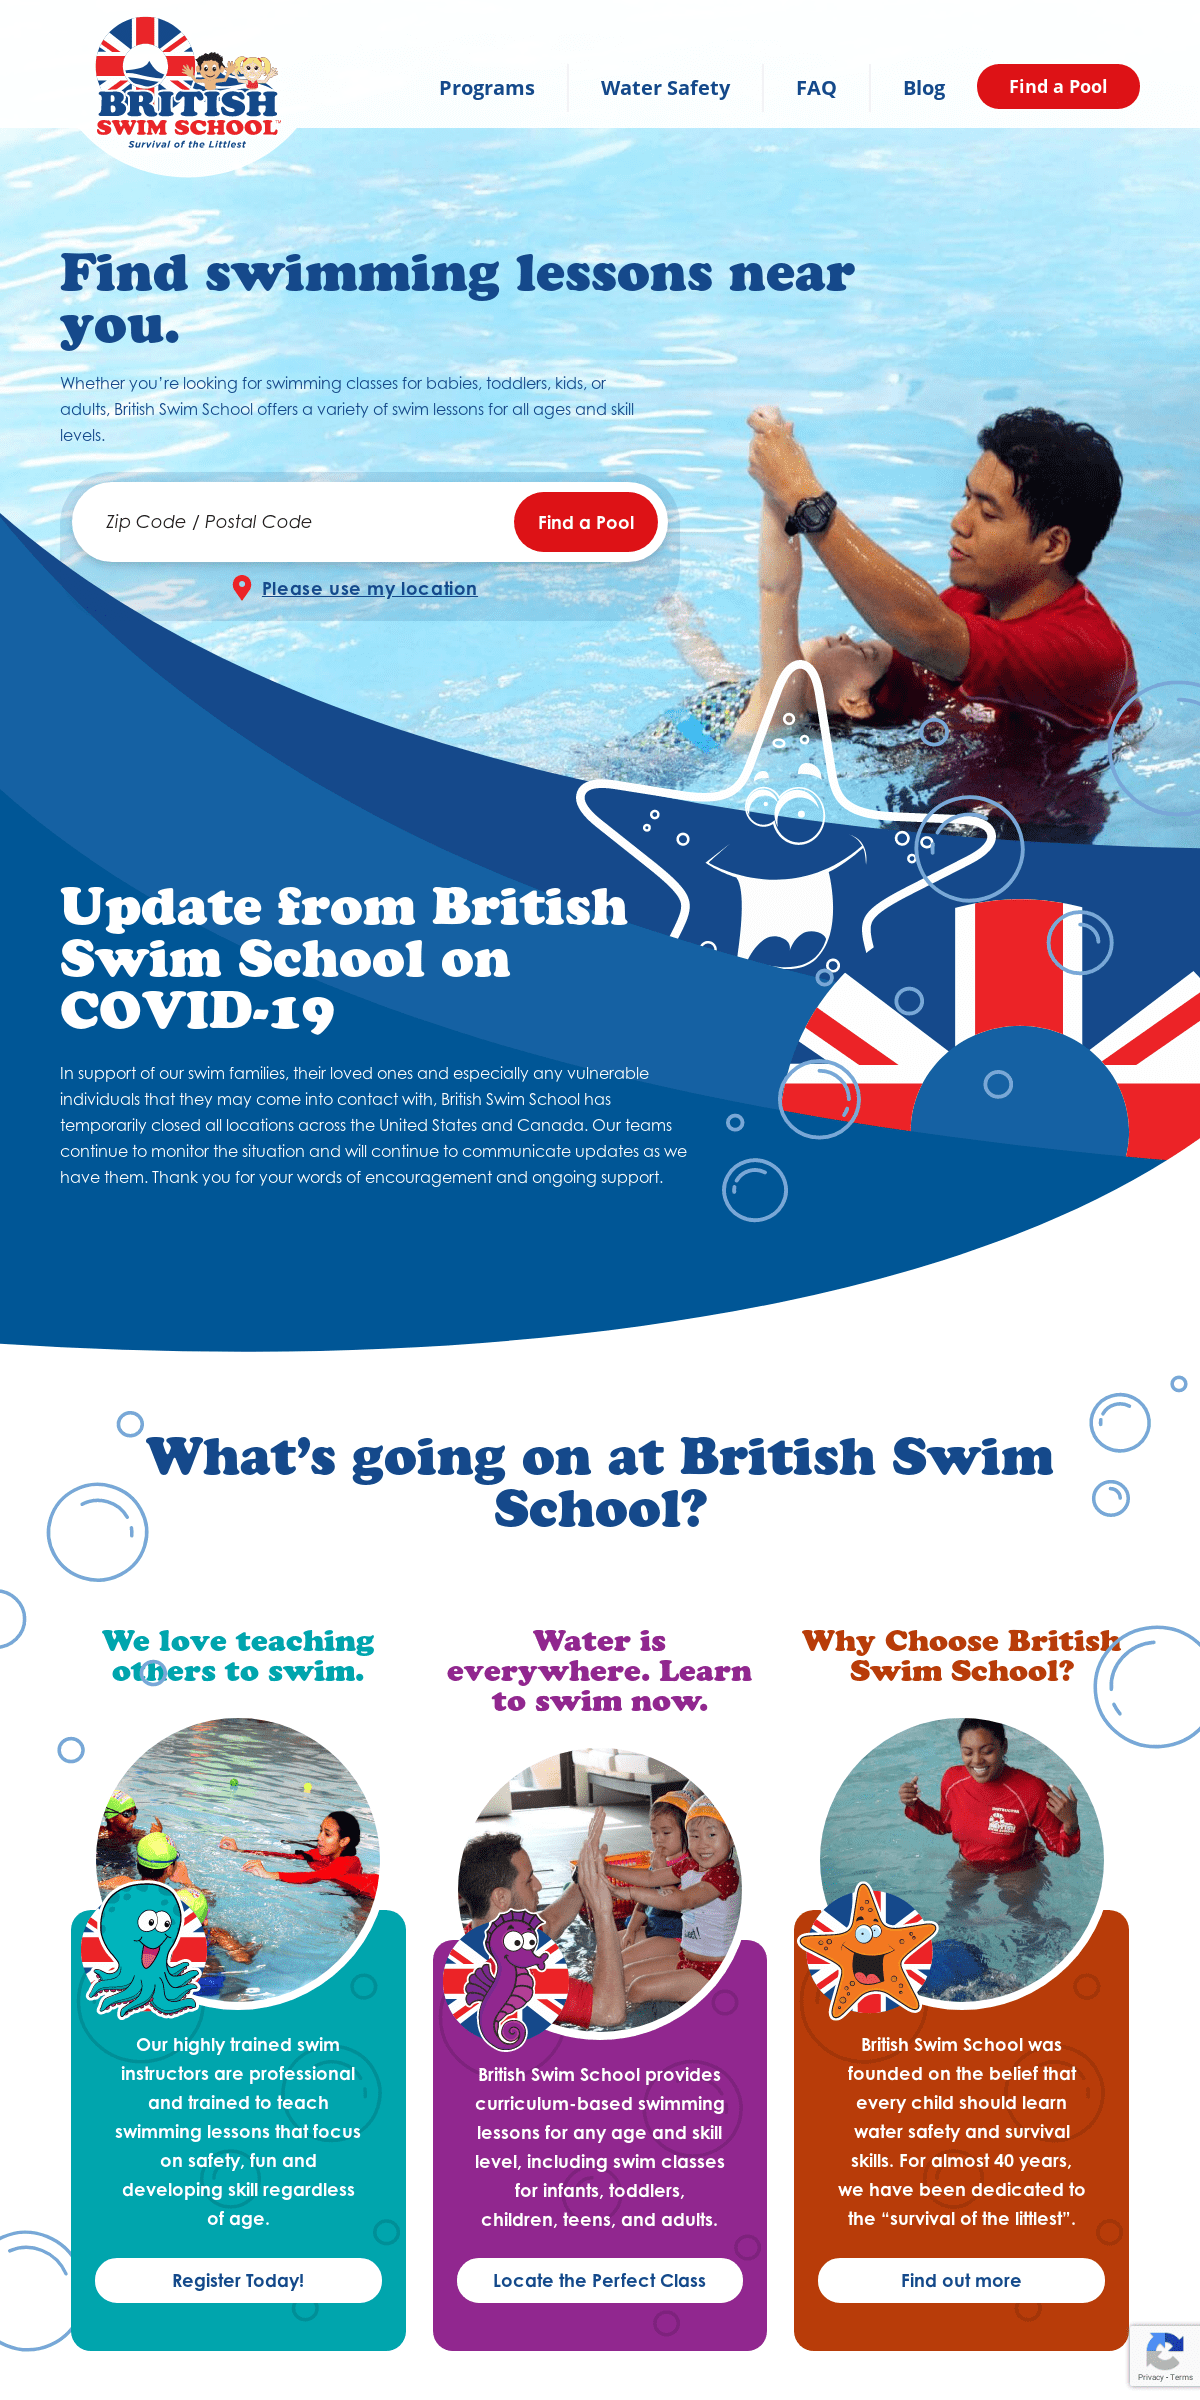 A complete backup of britishswimschool.com